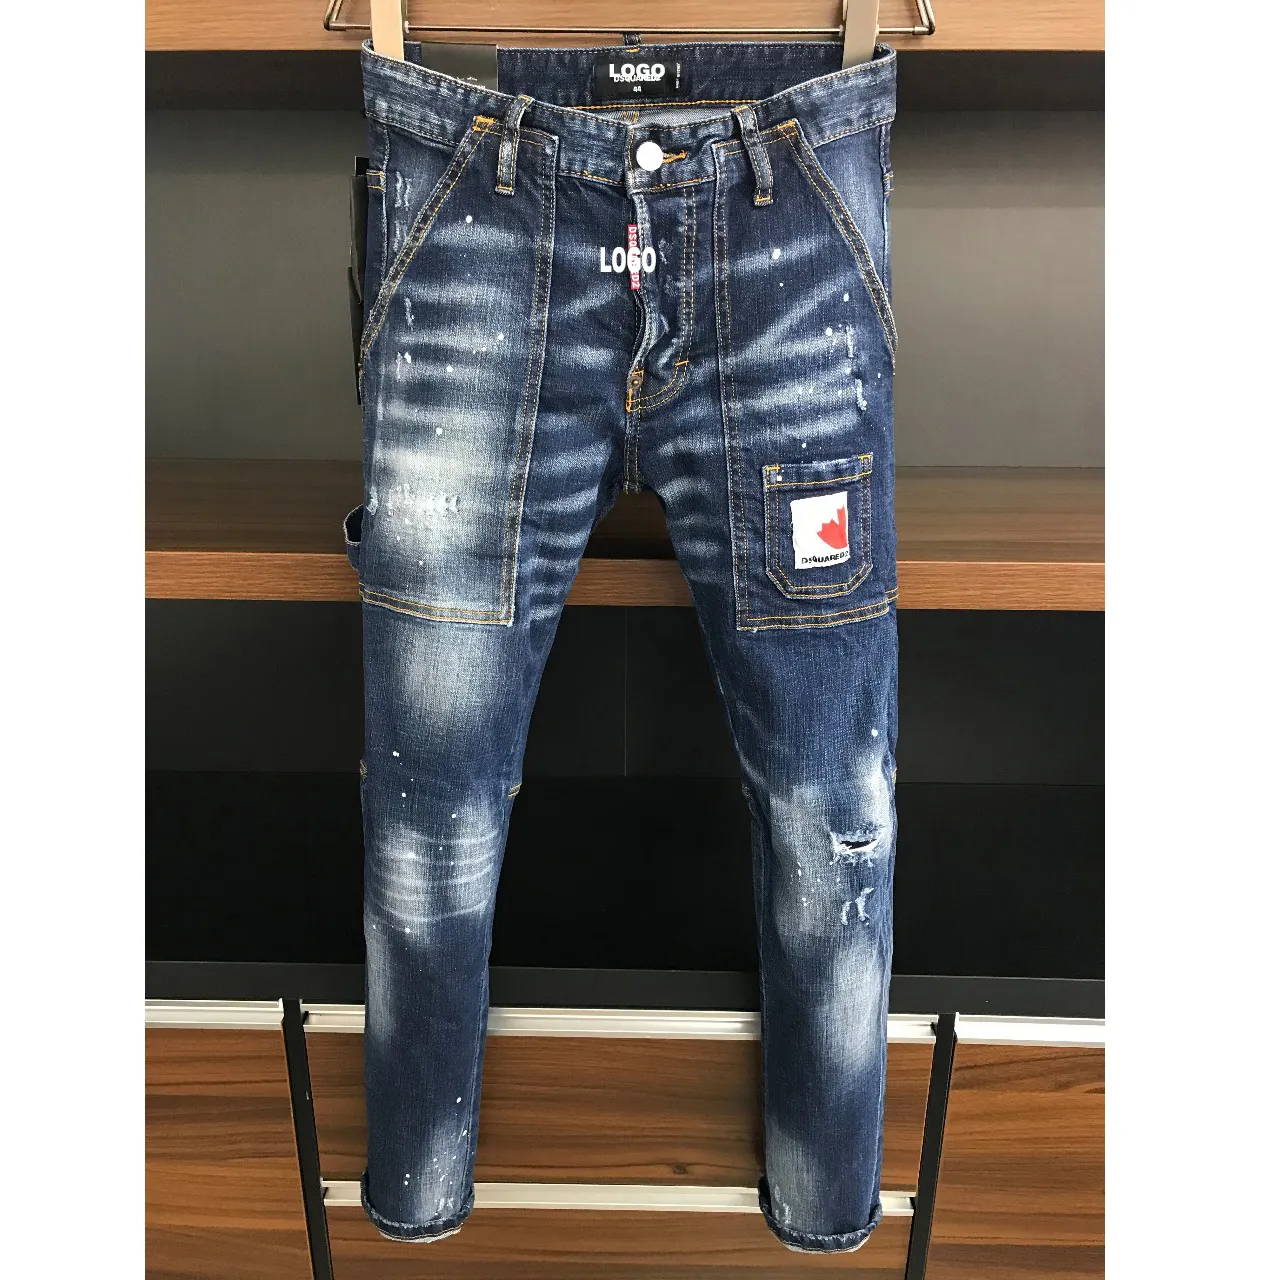 2023 autumn new jeans for men D2 jeans washed light color stereo stitching casual micro elastic slimming trend